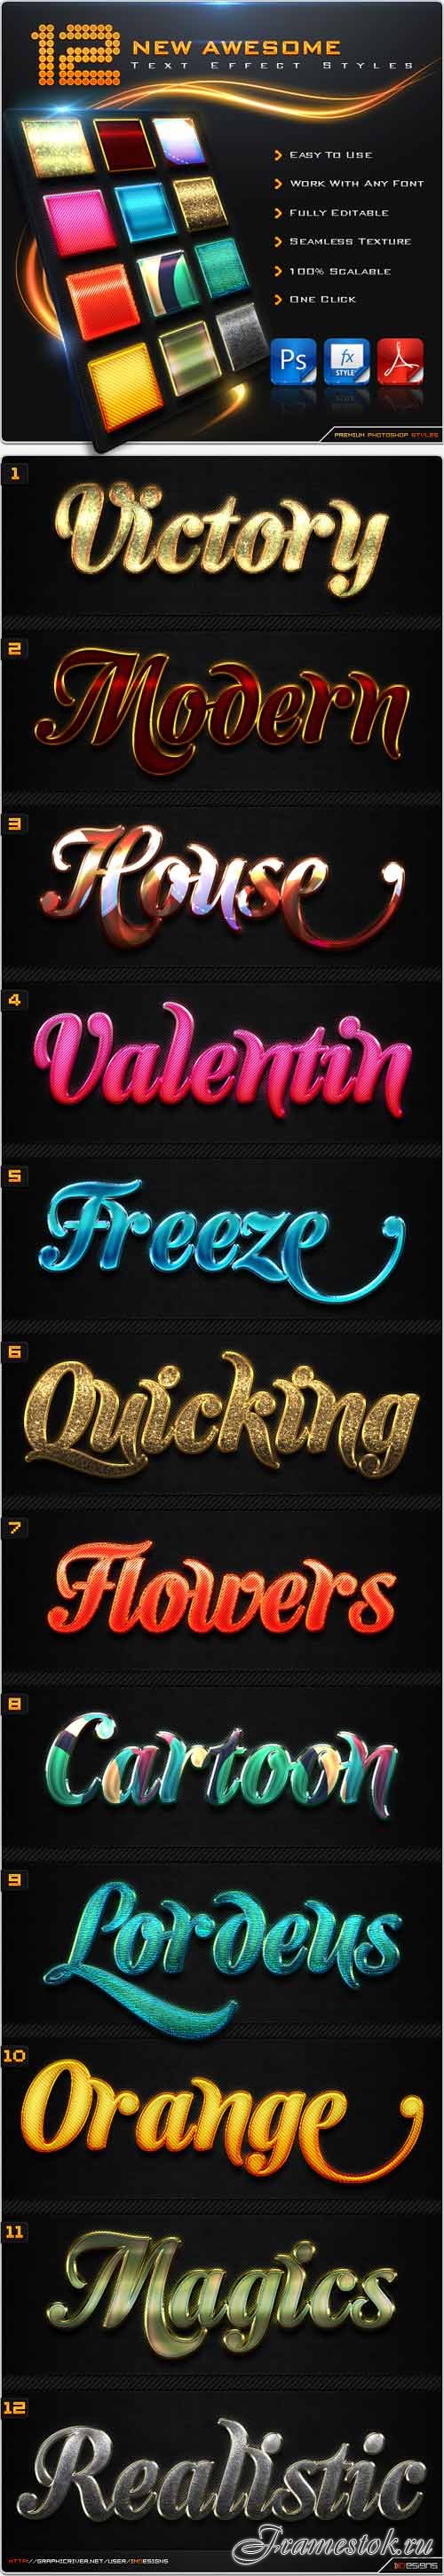 12 New Awesome Text Effect Styles